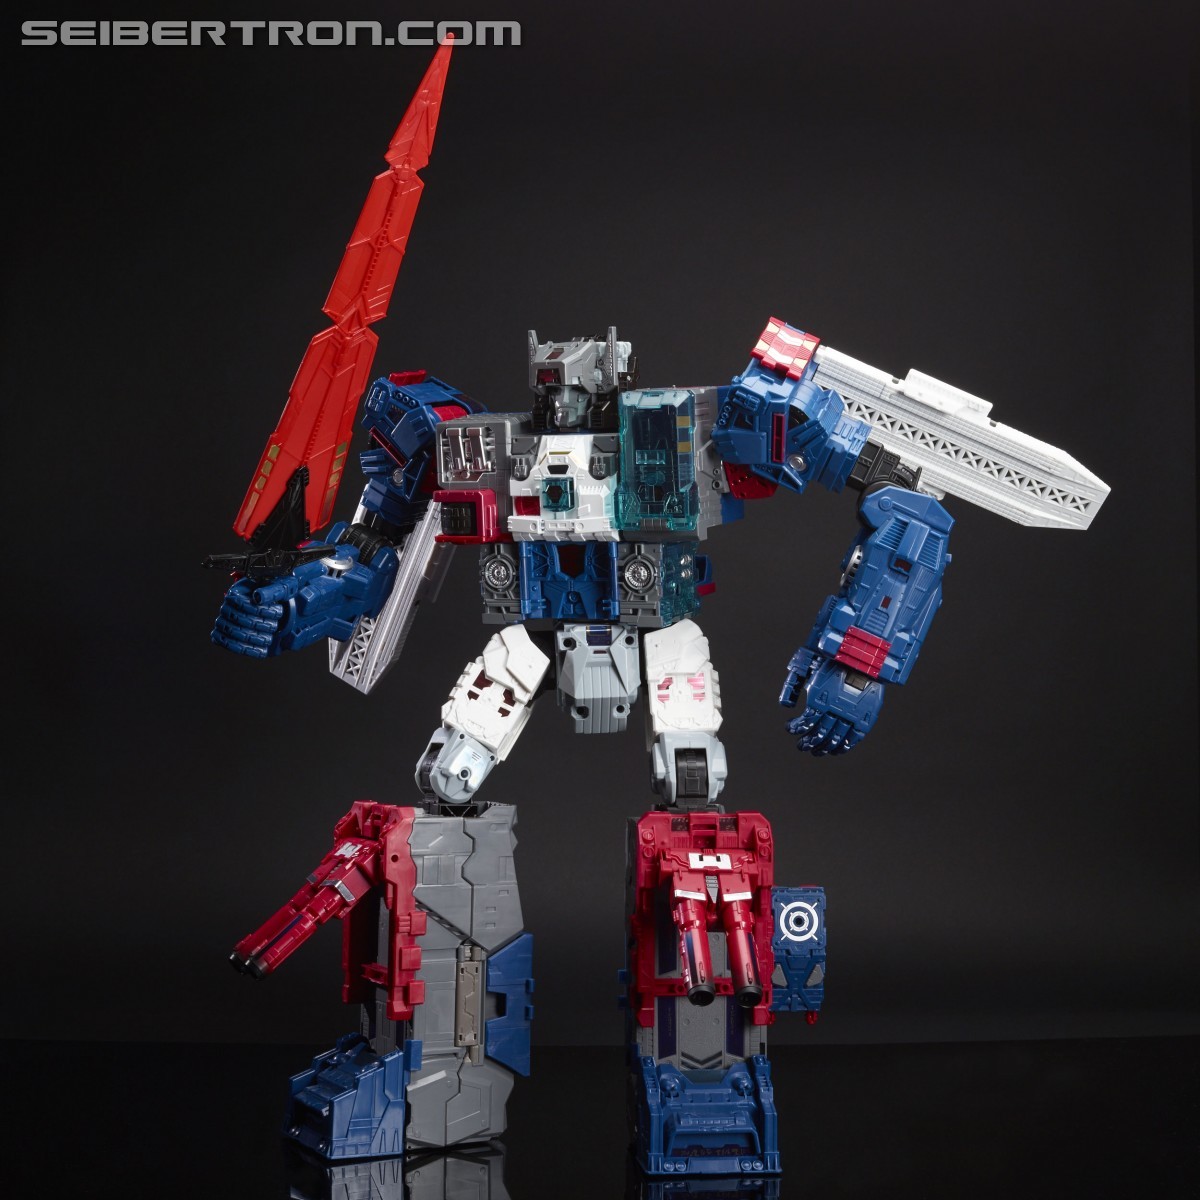 Transformers News: Sword for Takara Transformers Legends LG 31 Fortress Maximus Revealed and Comparisons with SDCC Toy